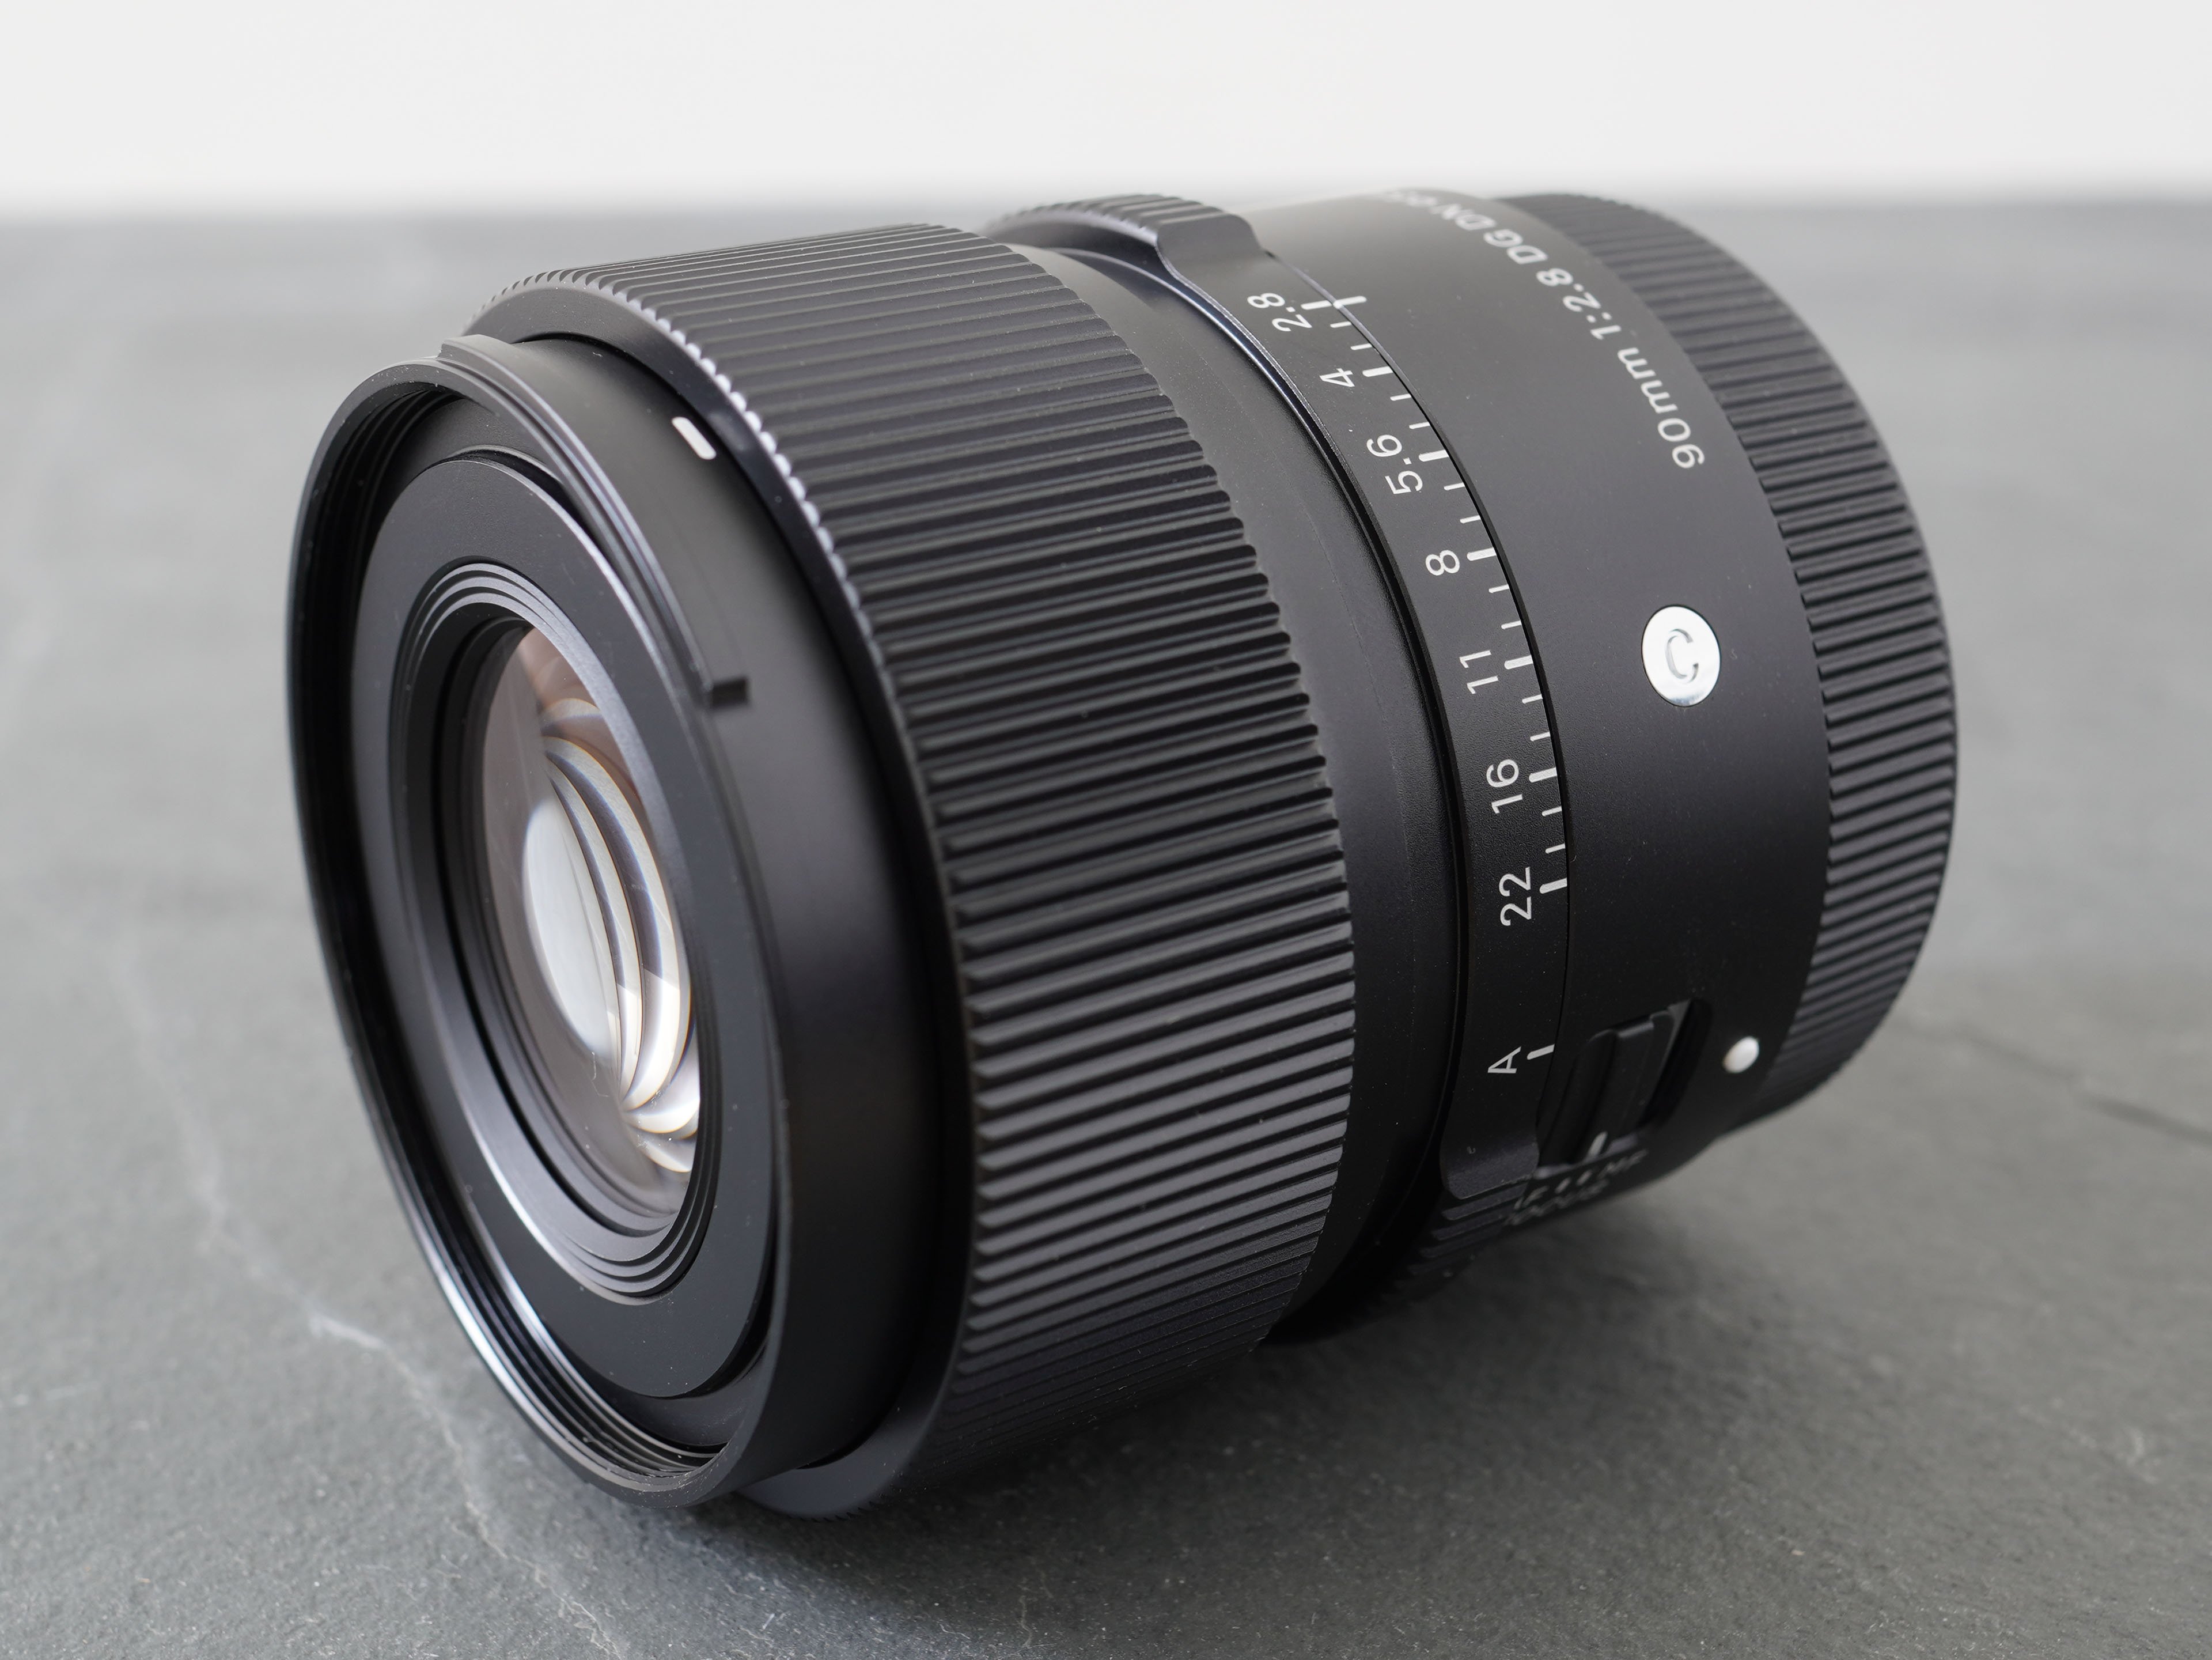 Sigma 90mm f2.8 DG DN review | Cameralabs